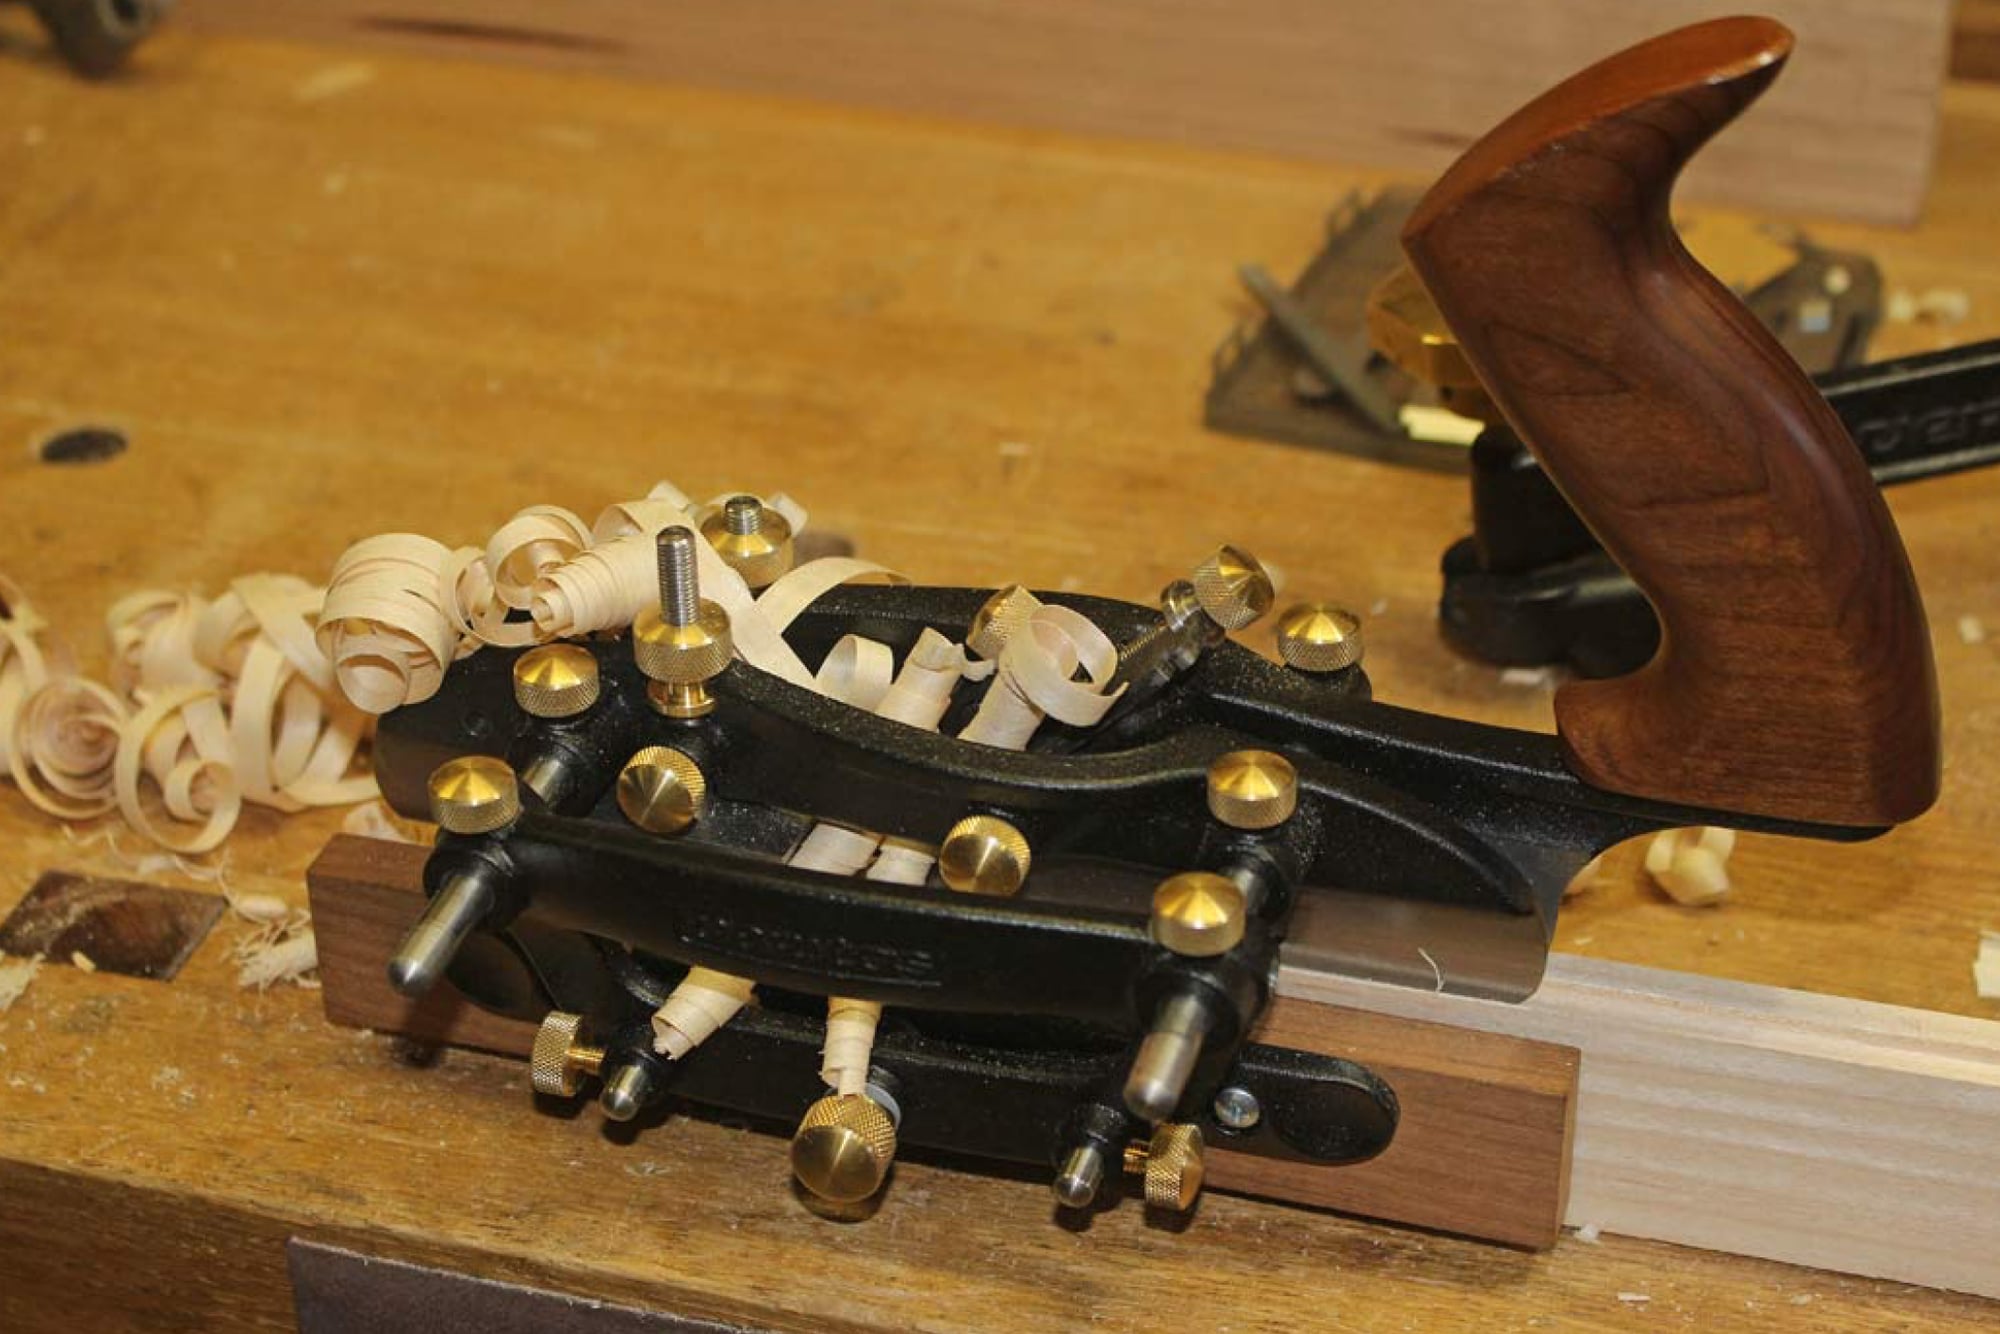 What Is A Combination Plane?